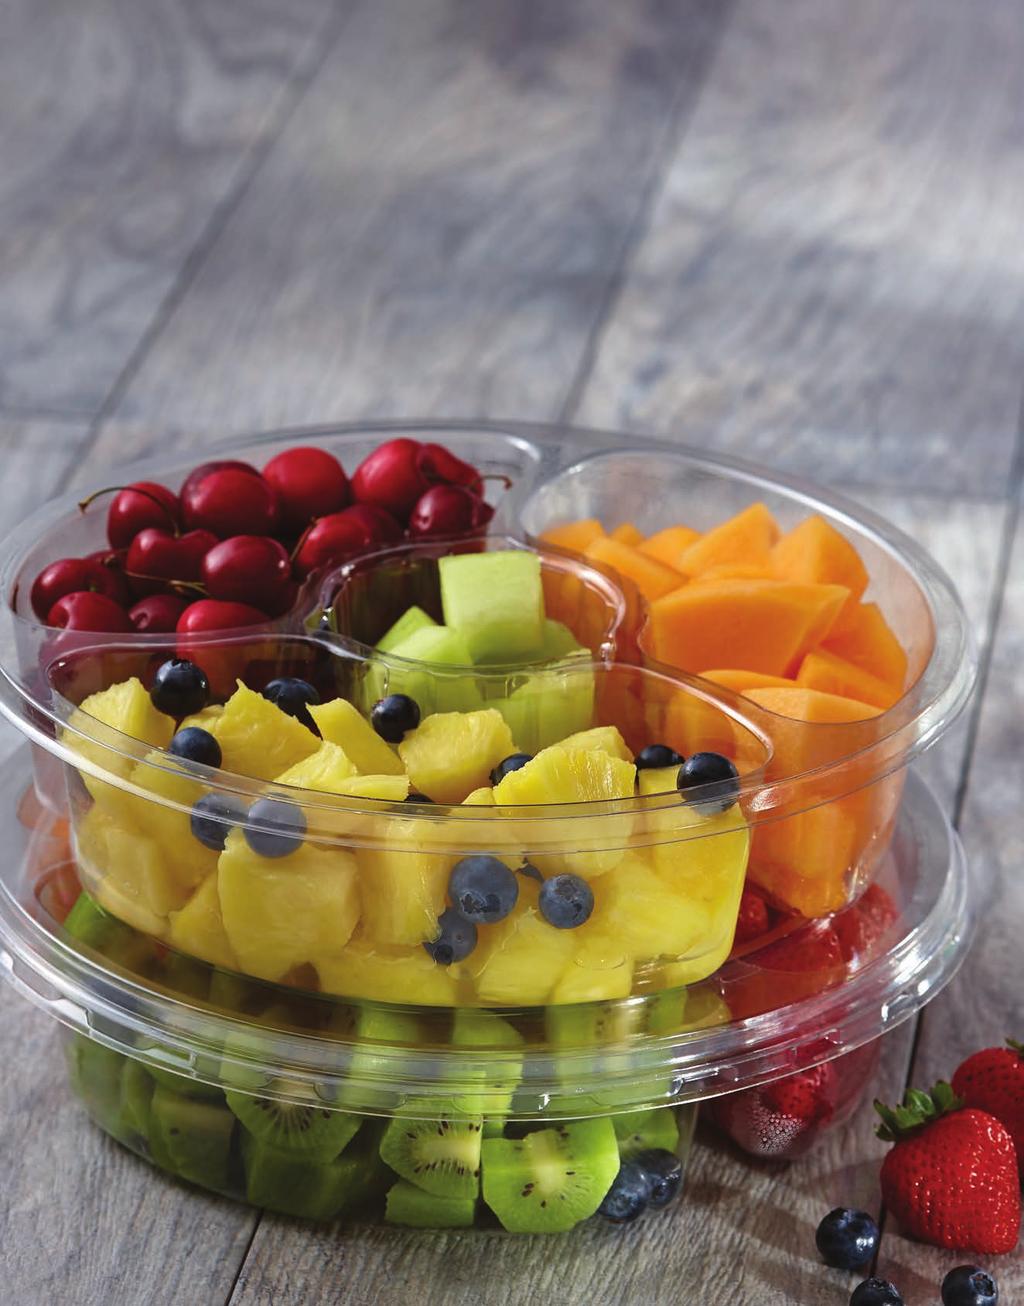 PRODUCE TRAYS VERSATILITY FOR PARTY APPLICATIONS Keep fruits, veggies, dips and snacks fresh with Sabert s produce trays.